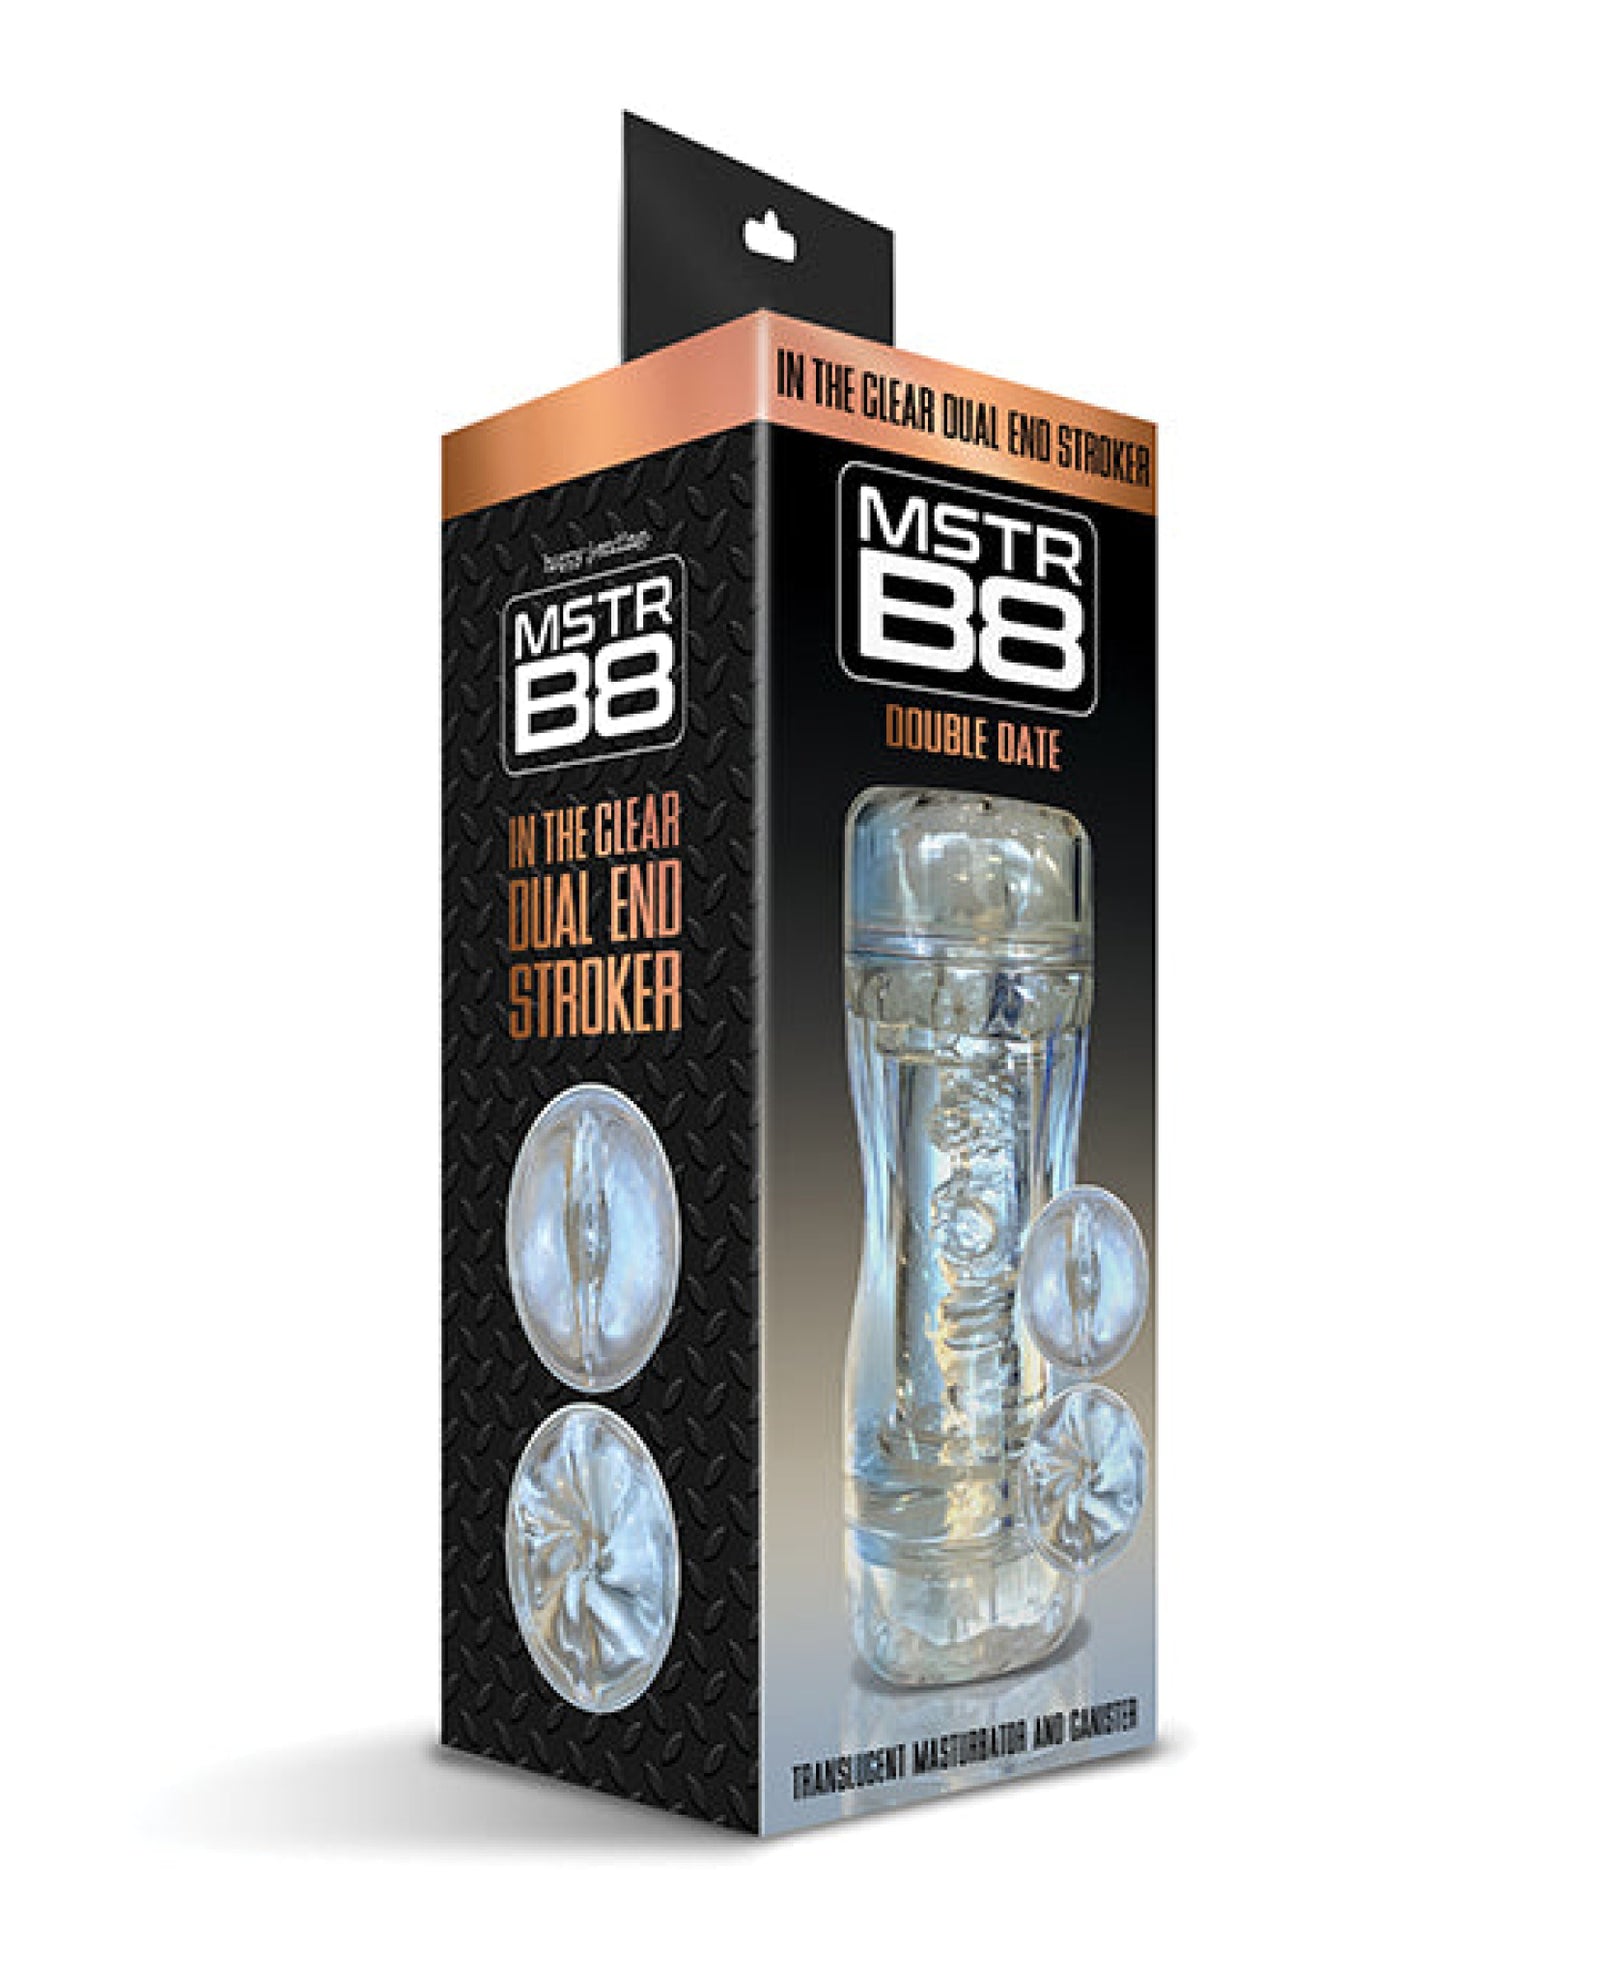 MSTR B8 Double Date  In the Clear Dual End Stroker Mstr B8